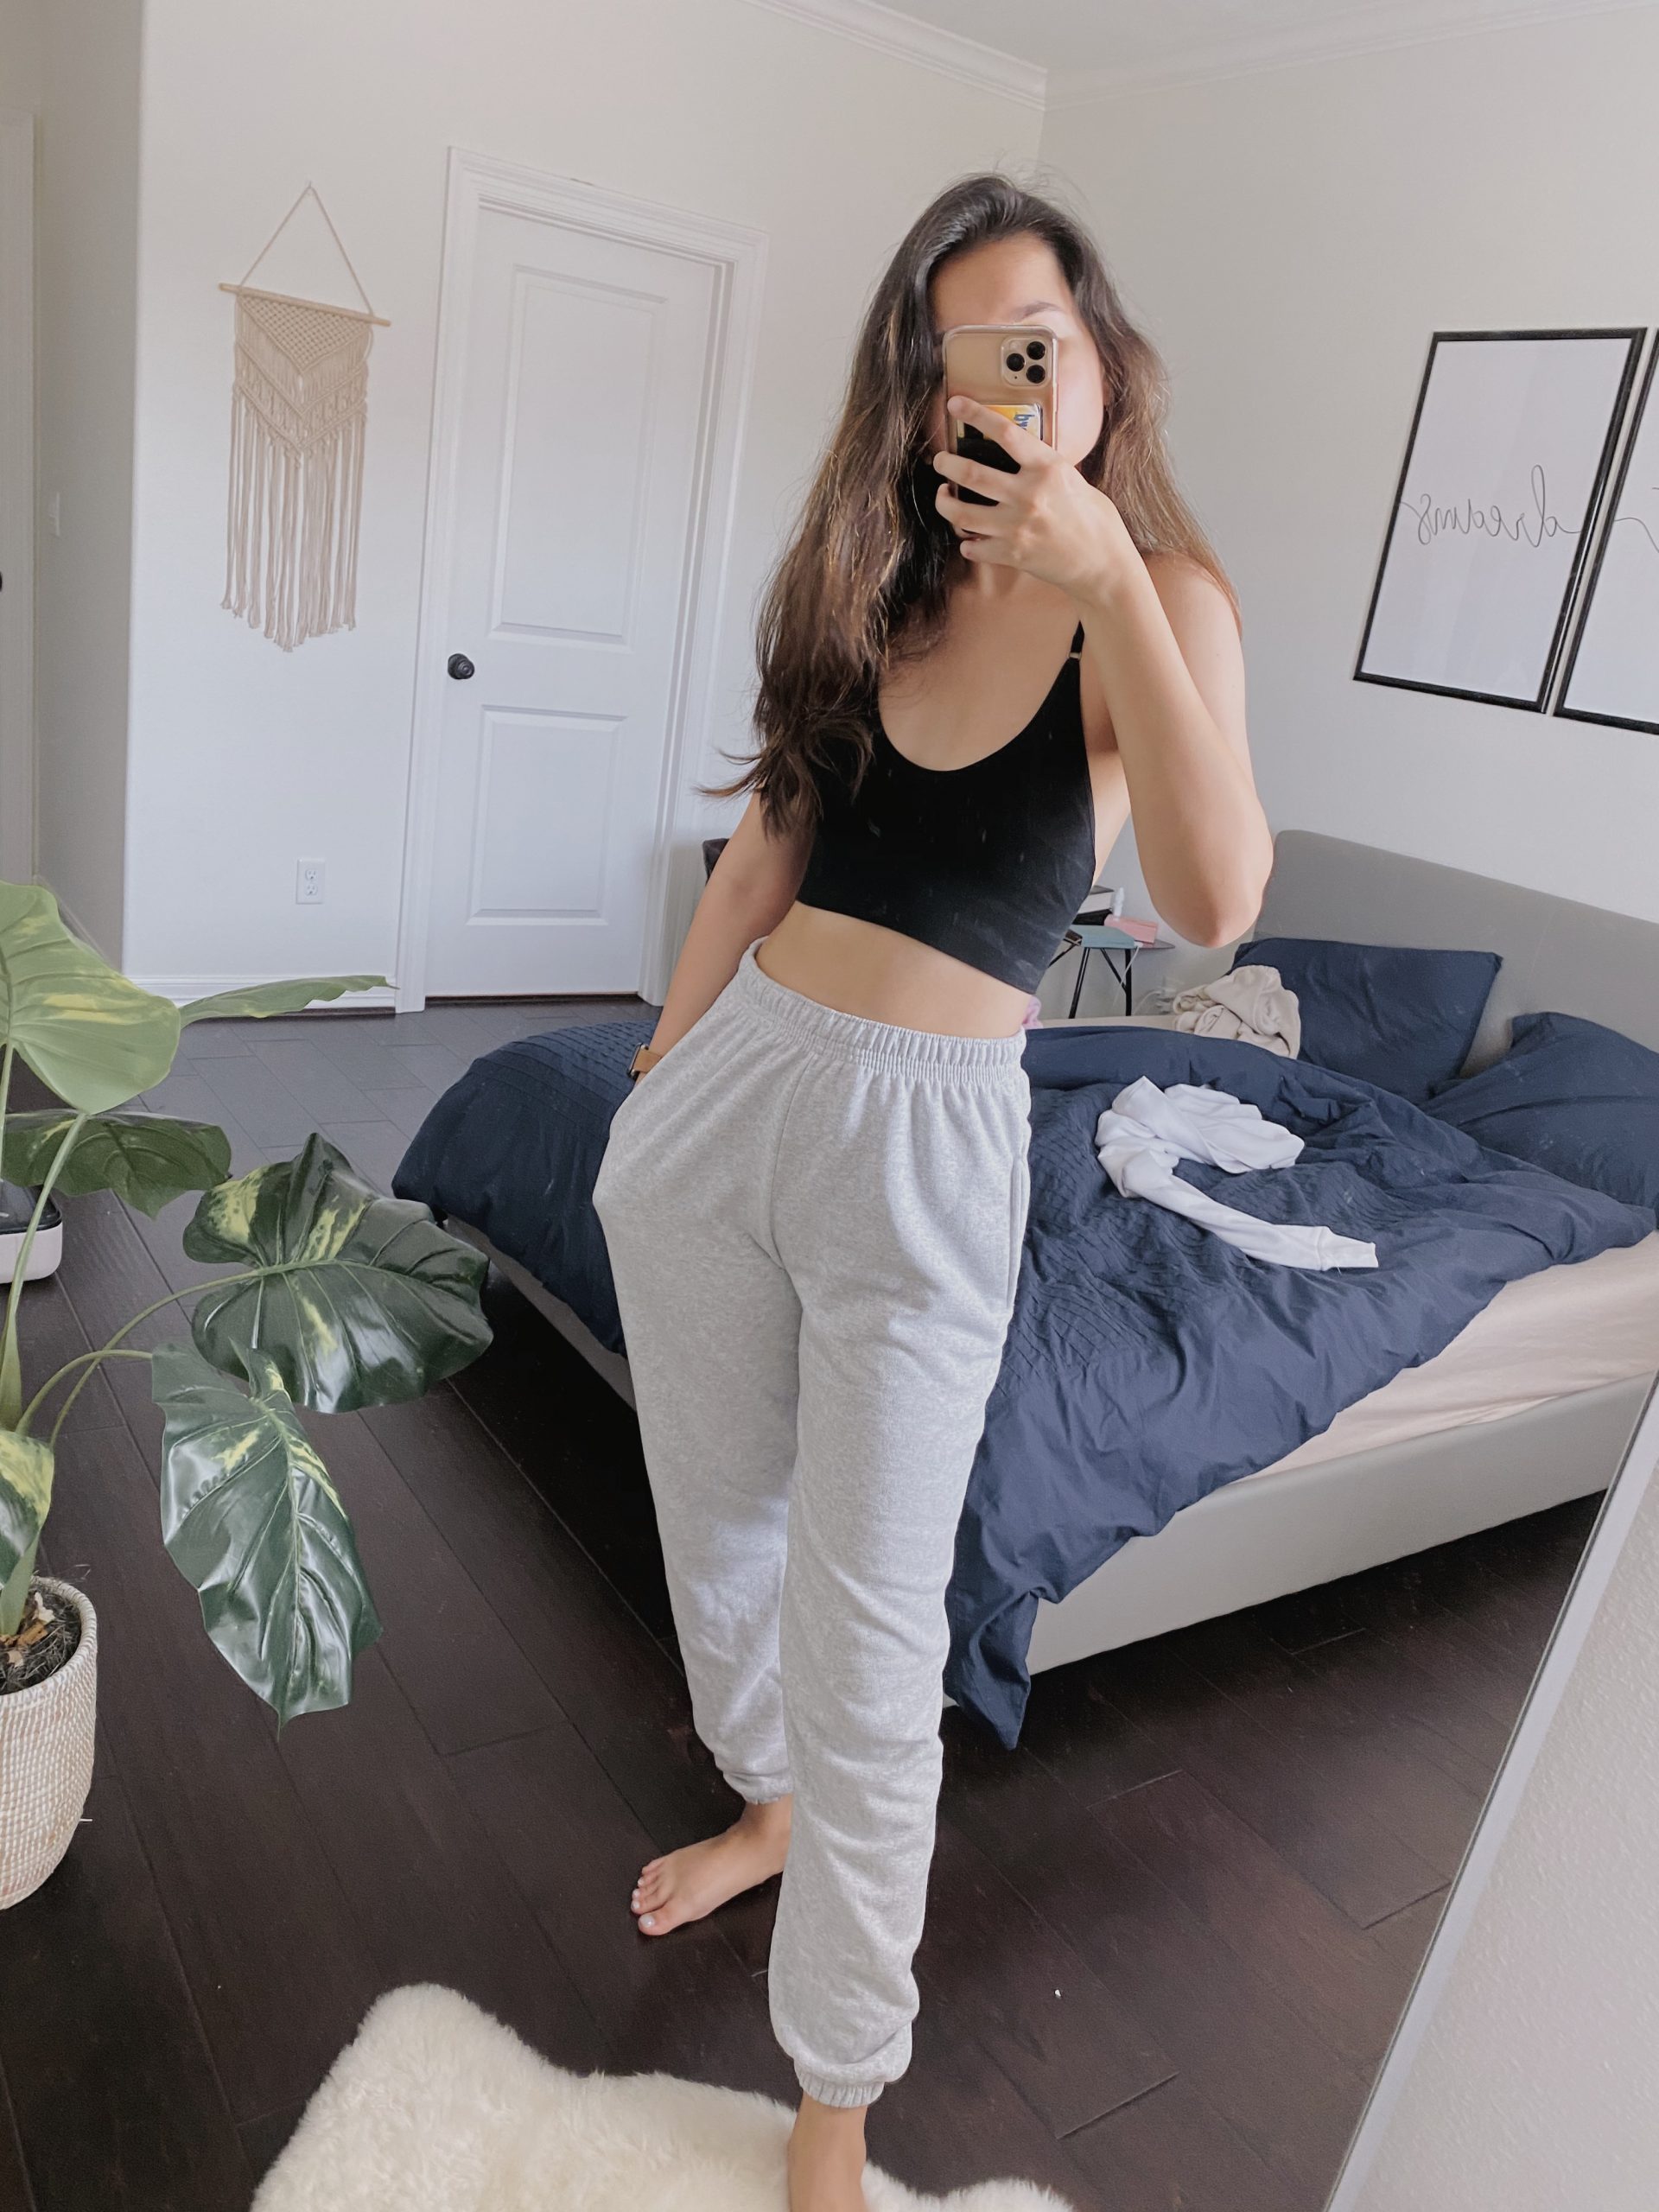 The $13 Sweatpants You've Been Seeing All Over Instagram